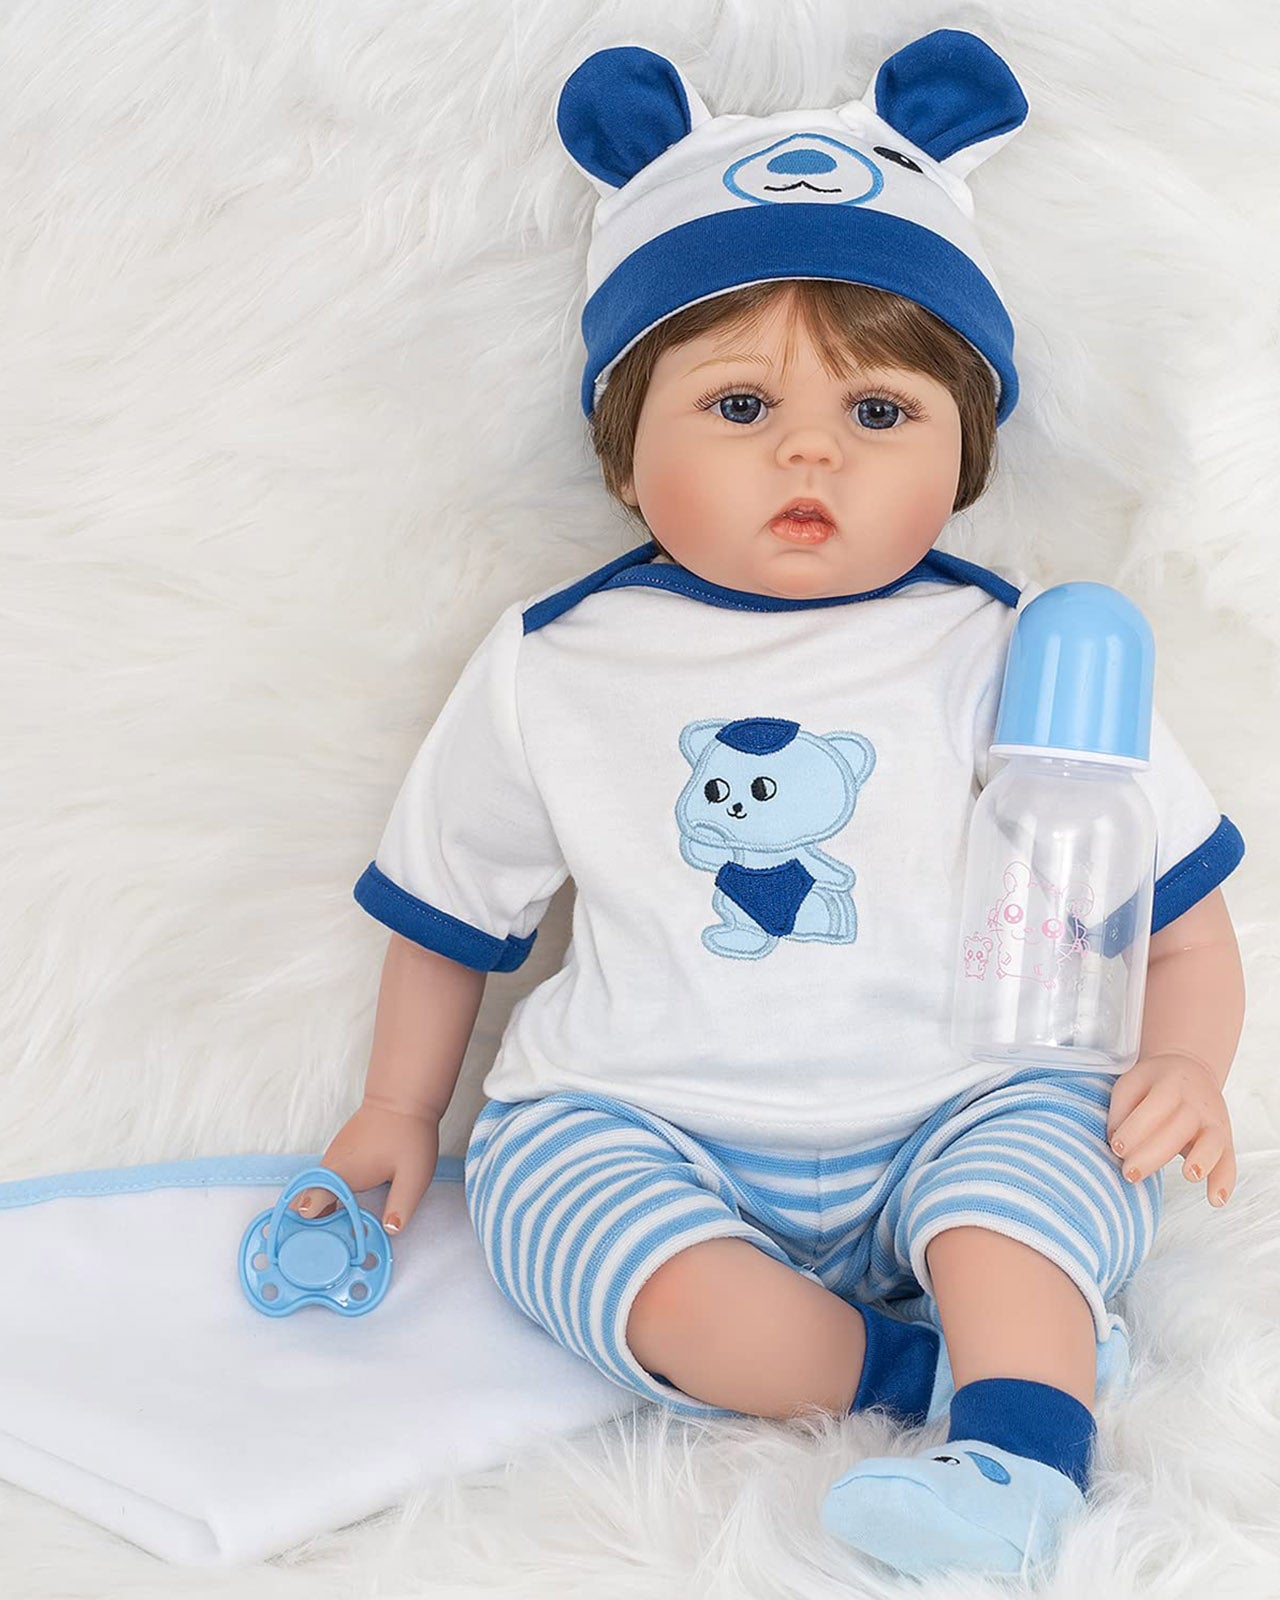 Carol - 22" Reborn Baby Dolls Silicone Vinyl Toddlers Boy with Weighted Soft Body